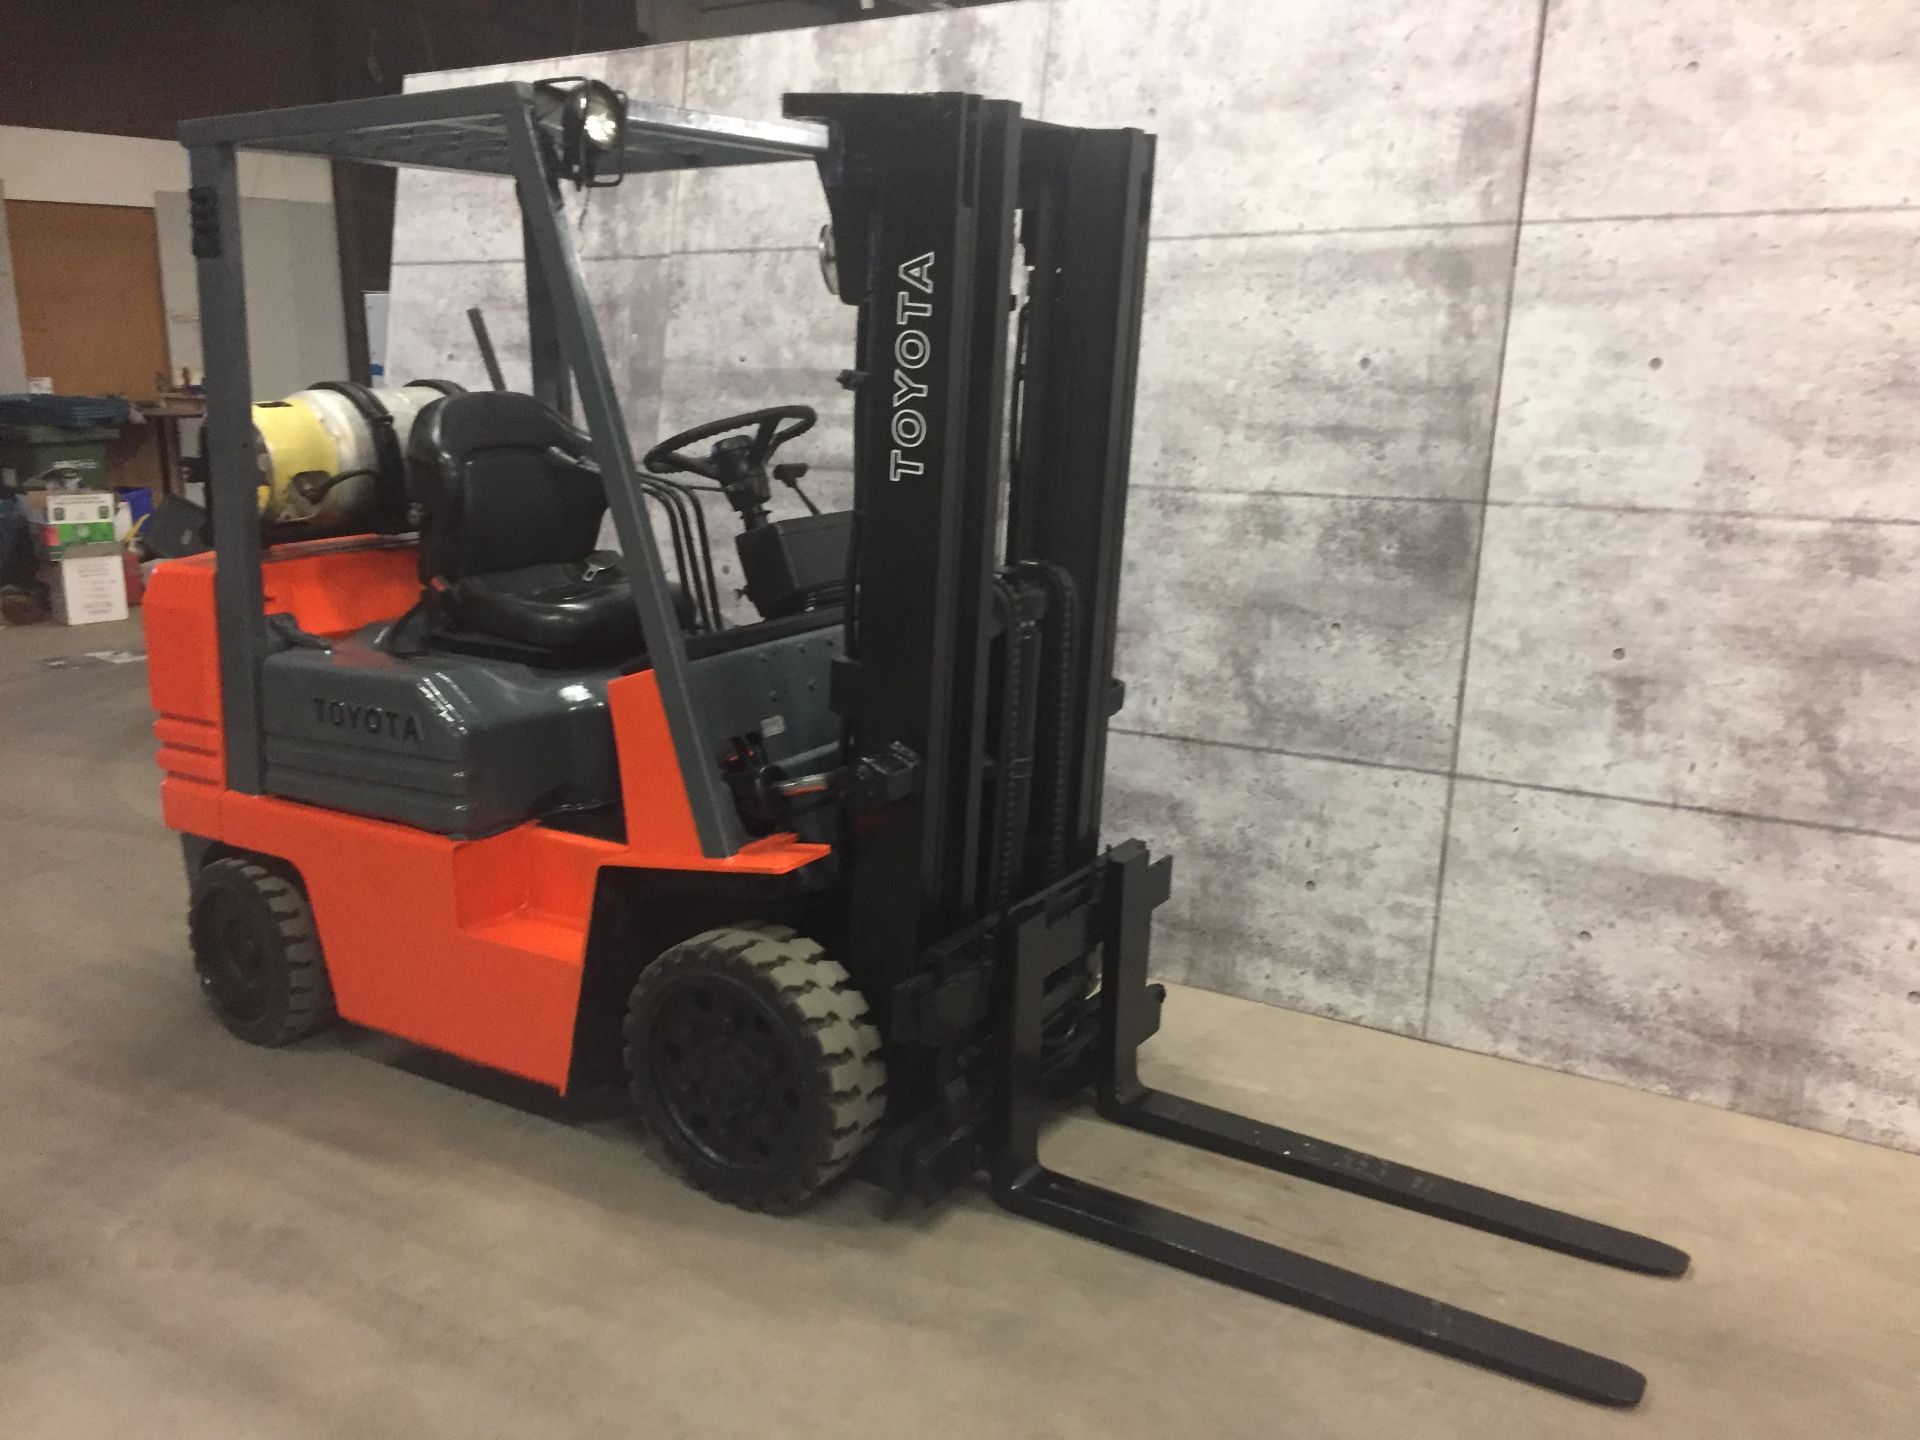 TOYOTA (NO. A 424992 TAKAHAMA) 5,000LBS LP PROPANE 3 STAGE SIDE SHIFT FORKLIFT (PROPANE TANK NOT - Image 2 of 5